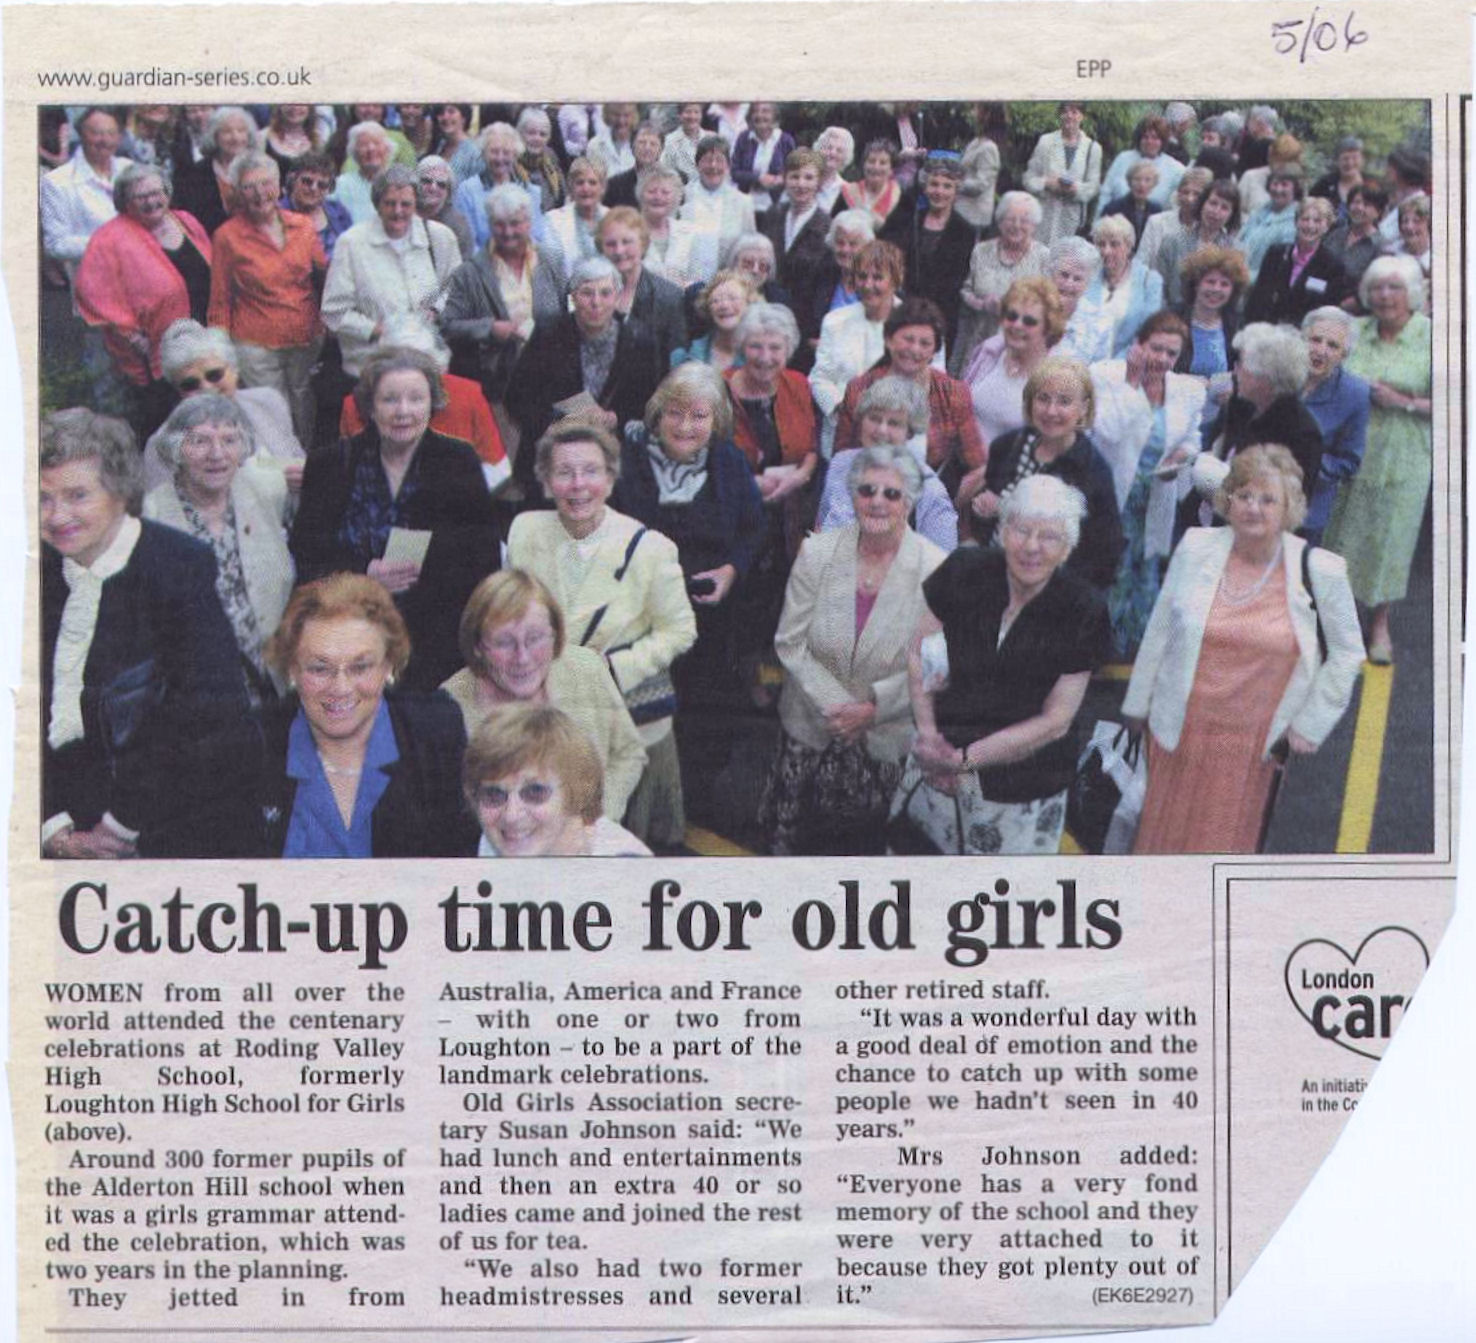 The 100 Year Reunion from the local paper